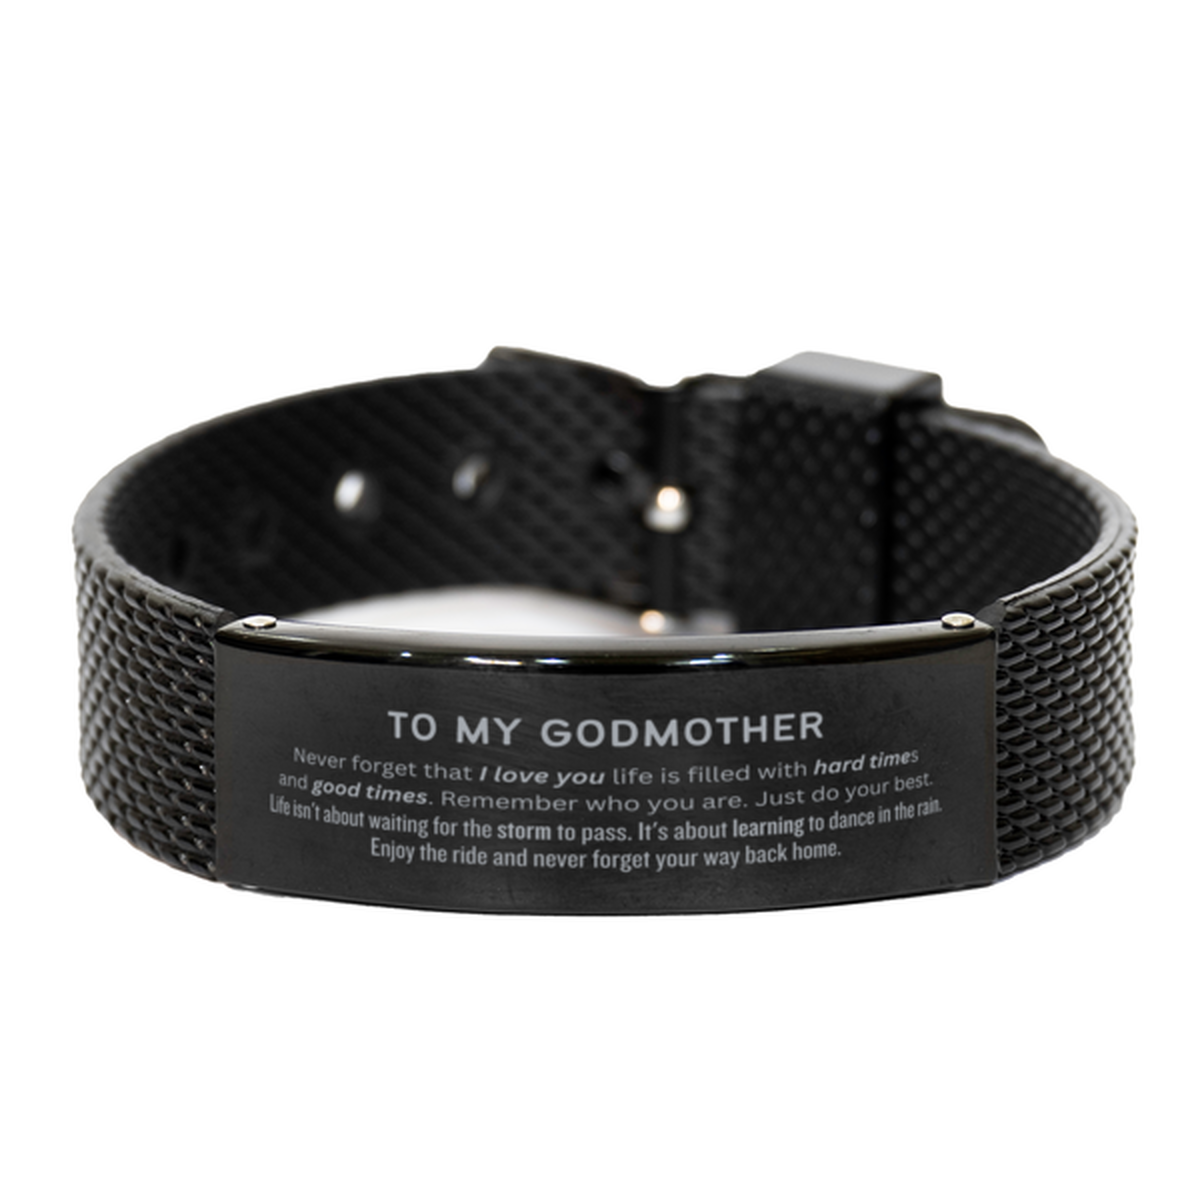 Christmas Godmother Black Shark Mesh Bracelet Gifts, To My Godmother Birthday Thank You Gifts For Godmother, Graduation Unique Gifts For Godmother To My Godmother Never forget that I love you life is filled with hard times and good times. Remember who you